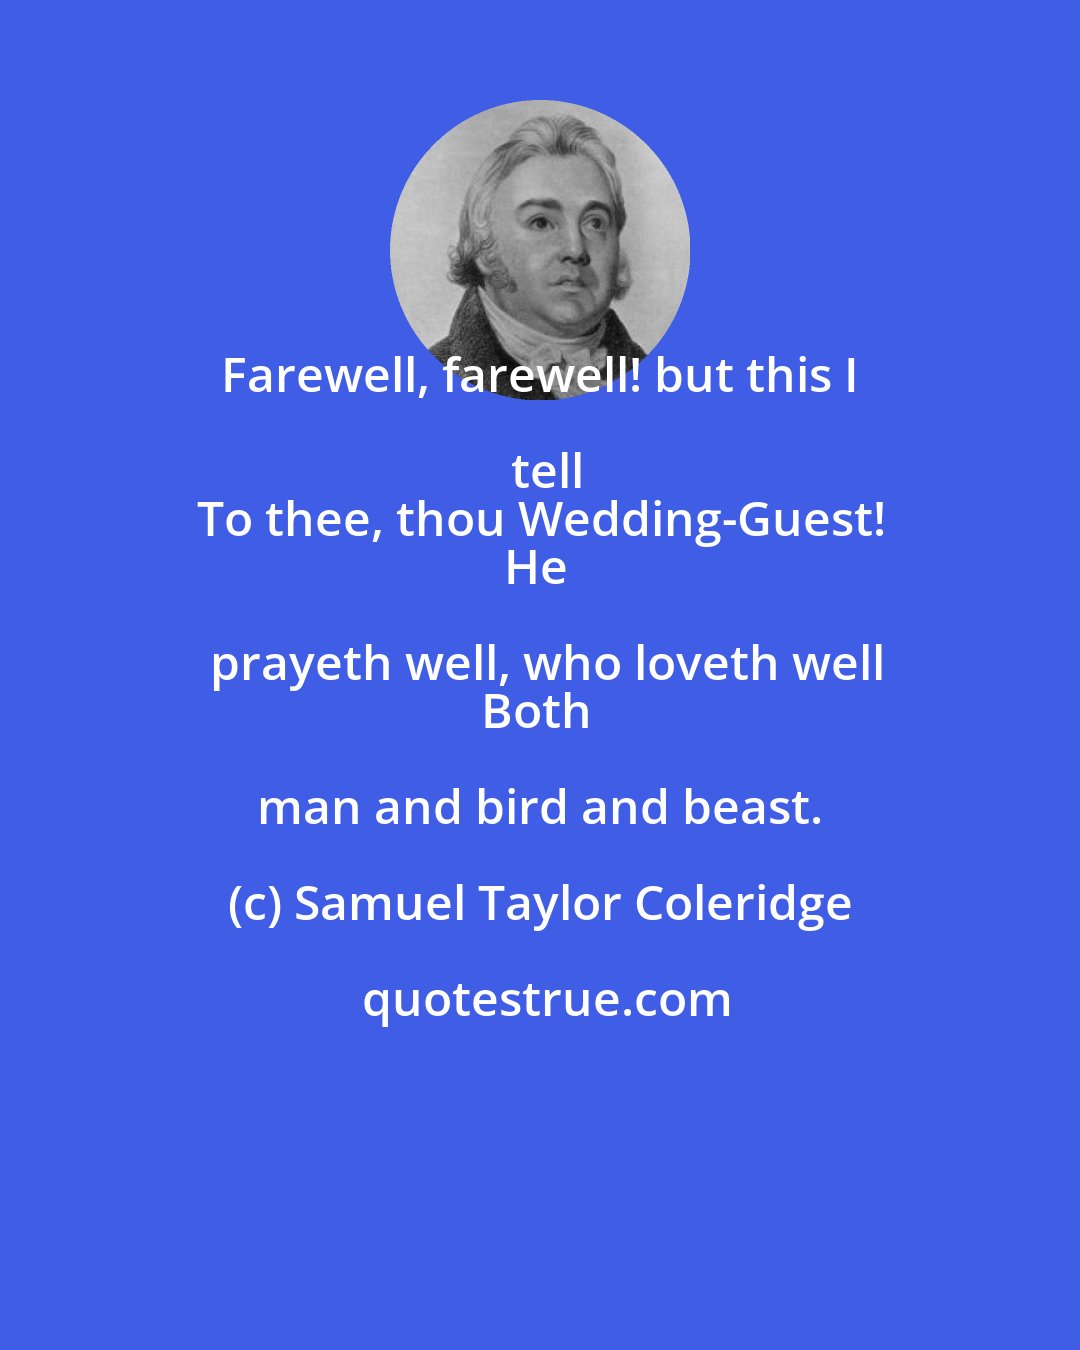 Samuel Taylor Coleridge: Farewell, farewell! but this I tell
To thee, thou Wedding-Guest!
He prayeth well, who loveth well
Both man and bird and beast.